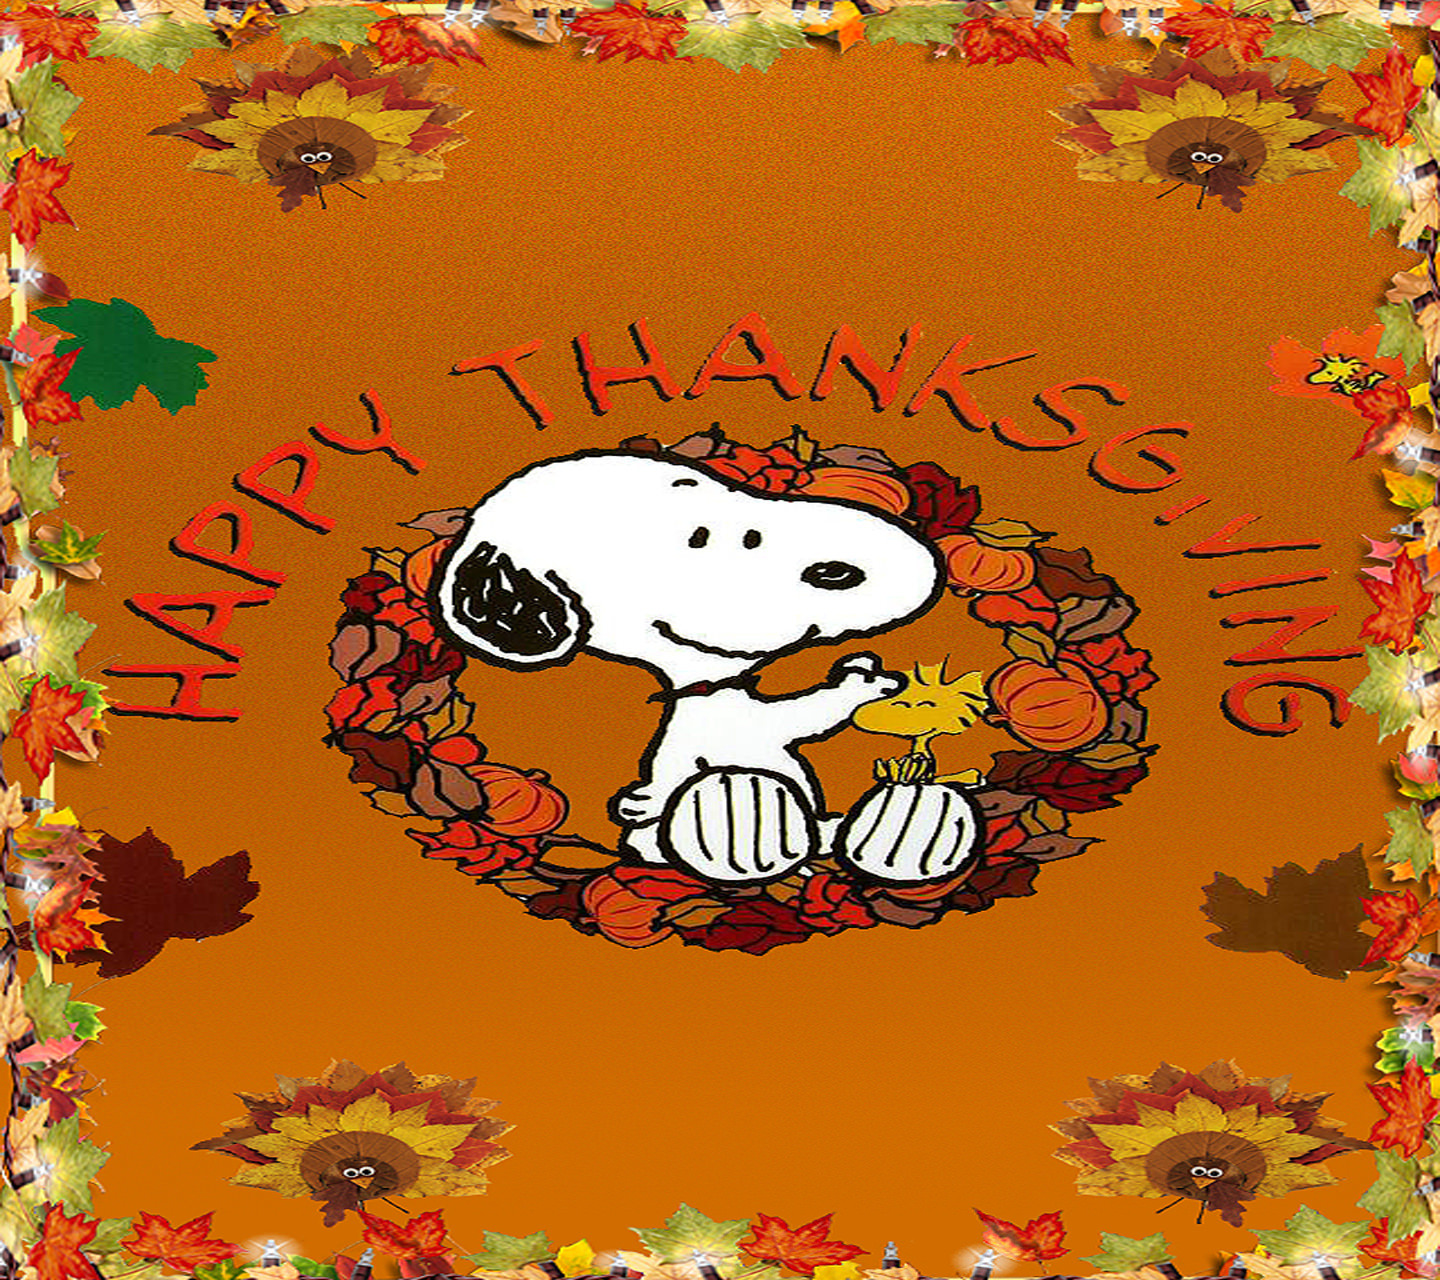 20+ Snoopy Wallpapers, Backgrounds, Images | FreeCreatives